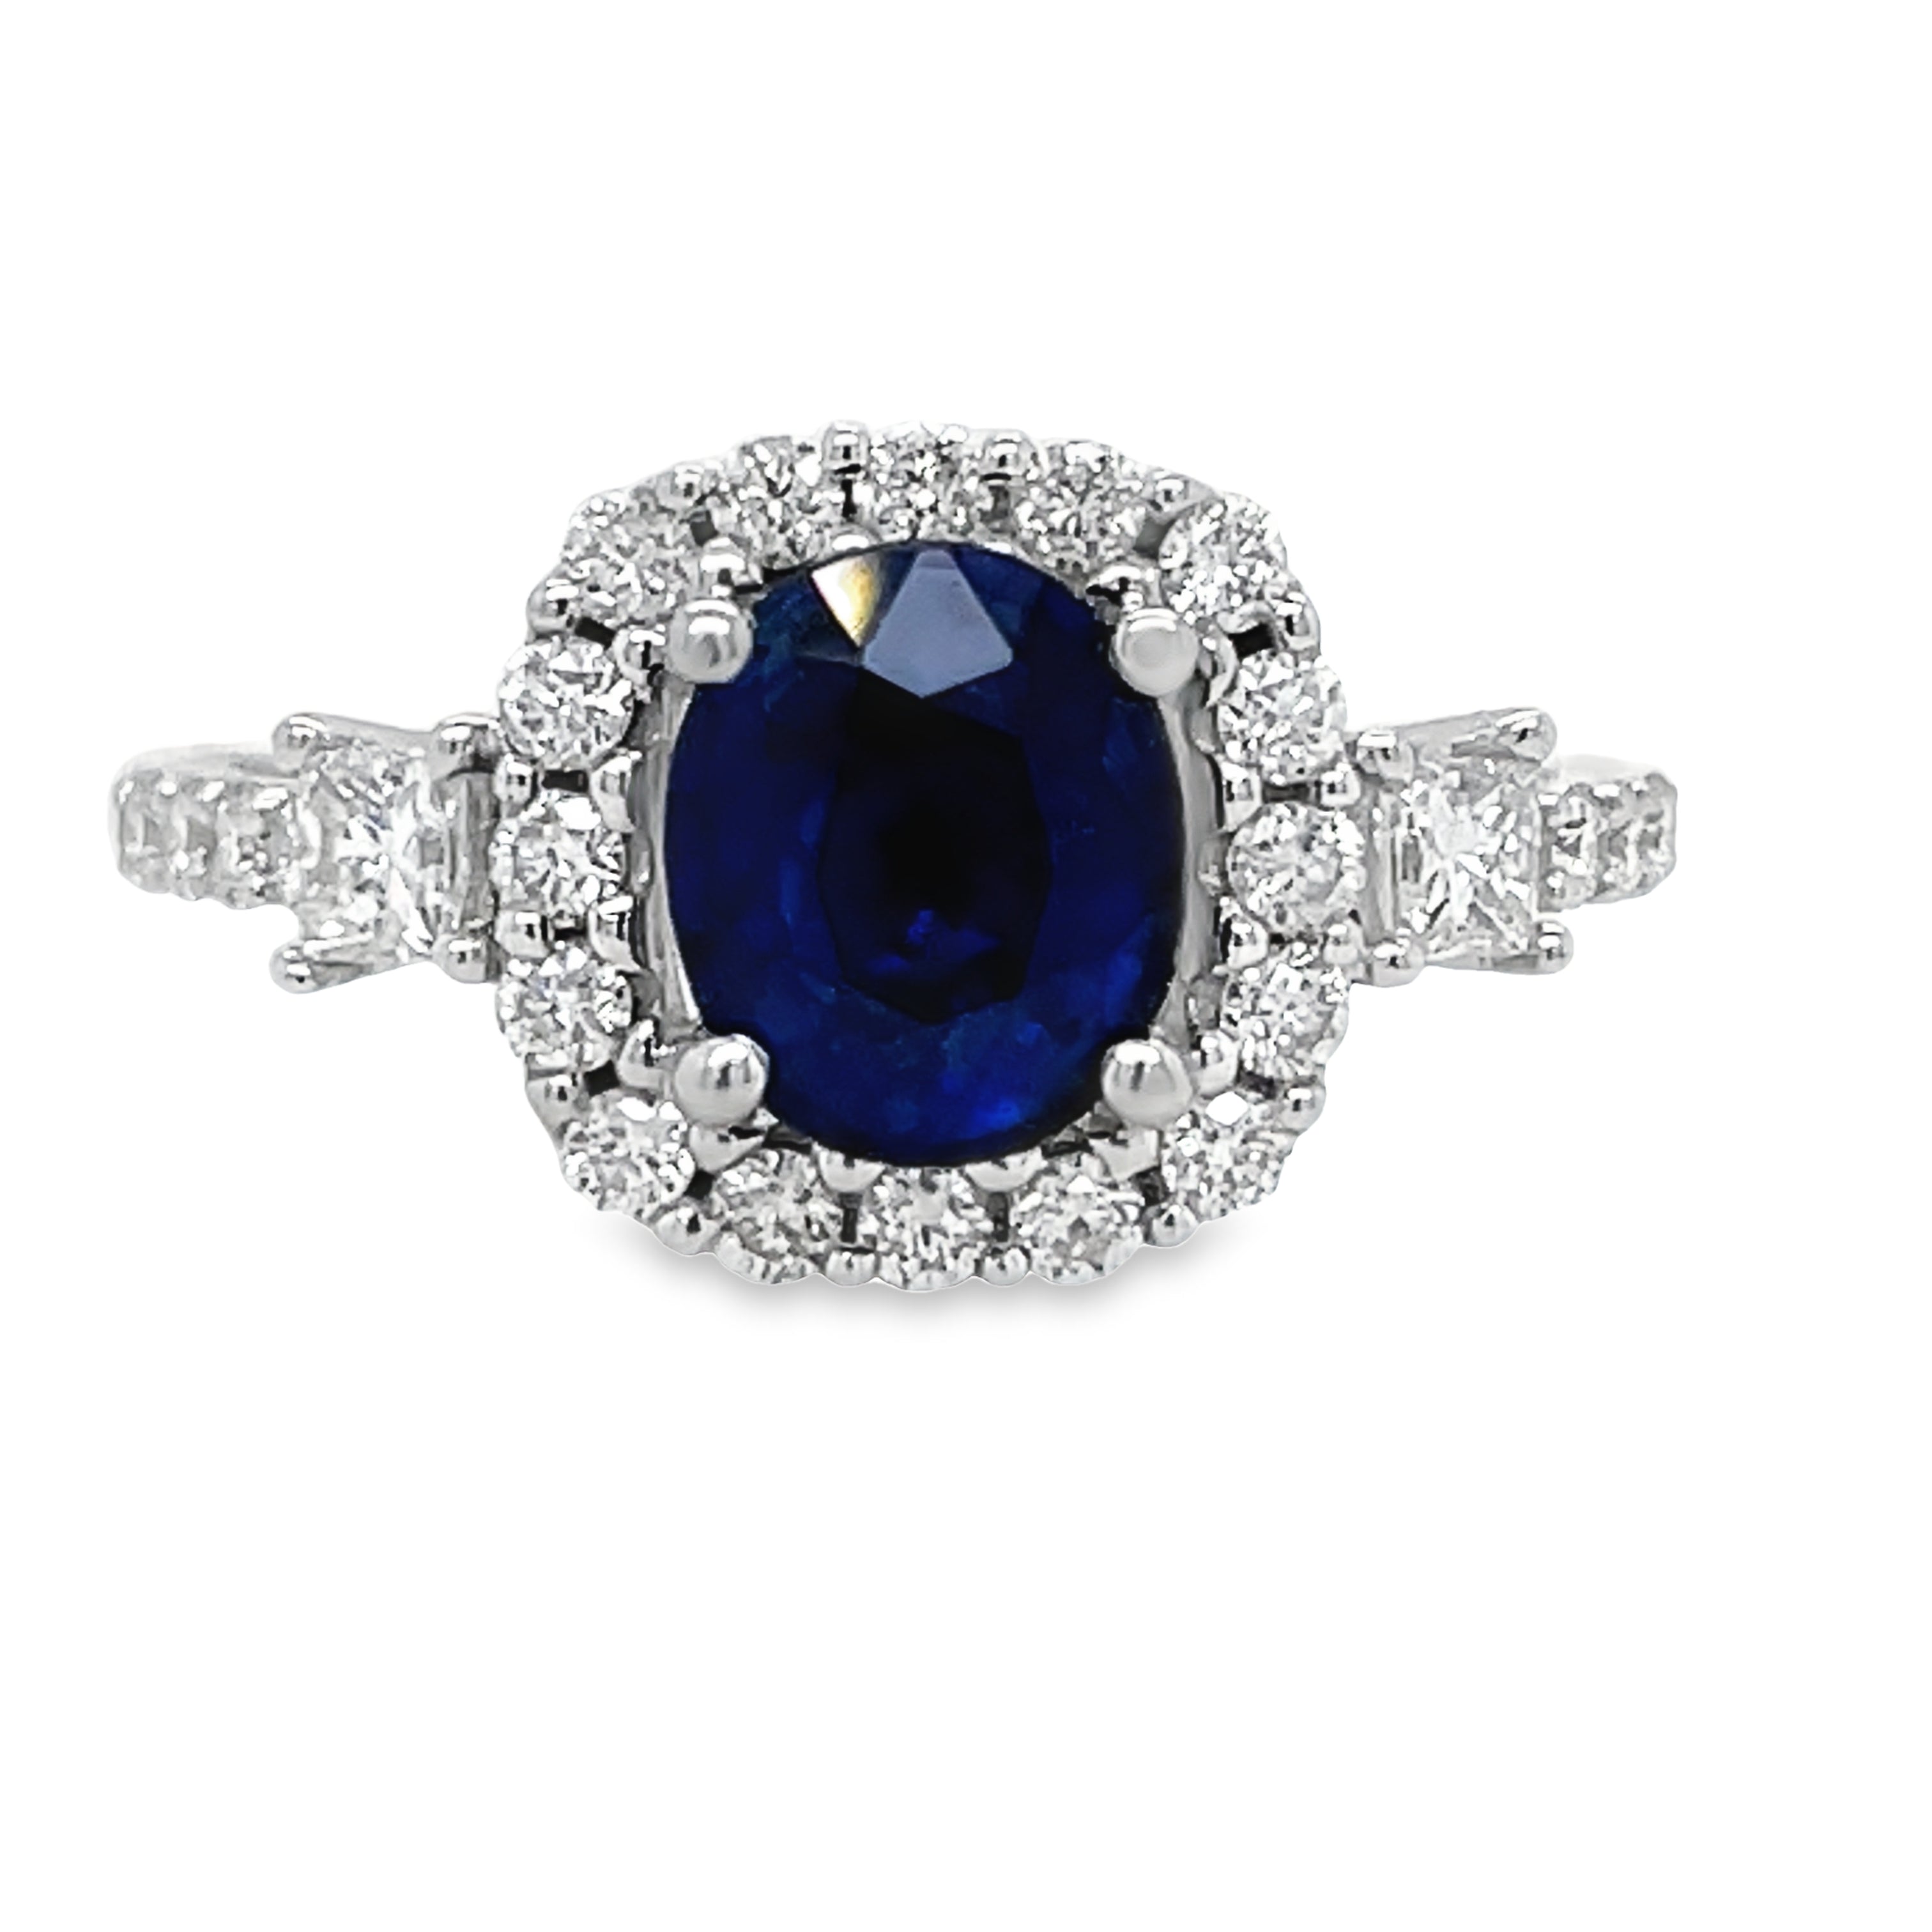 Experience luxury and elegance with our Oval Sapphire Diamond Bezel Ring. Featuring a stunning oval sapphire surrounded by princess cut and round diamonds totaling 0.59 cts, all set in a beautiful diamond bezel on an 18k white gold band. Make a statement that exudes sophistication and style.